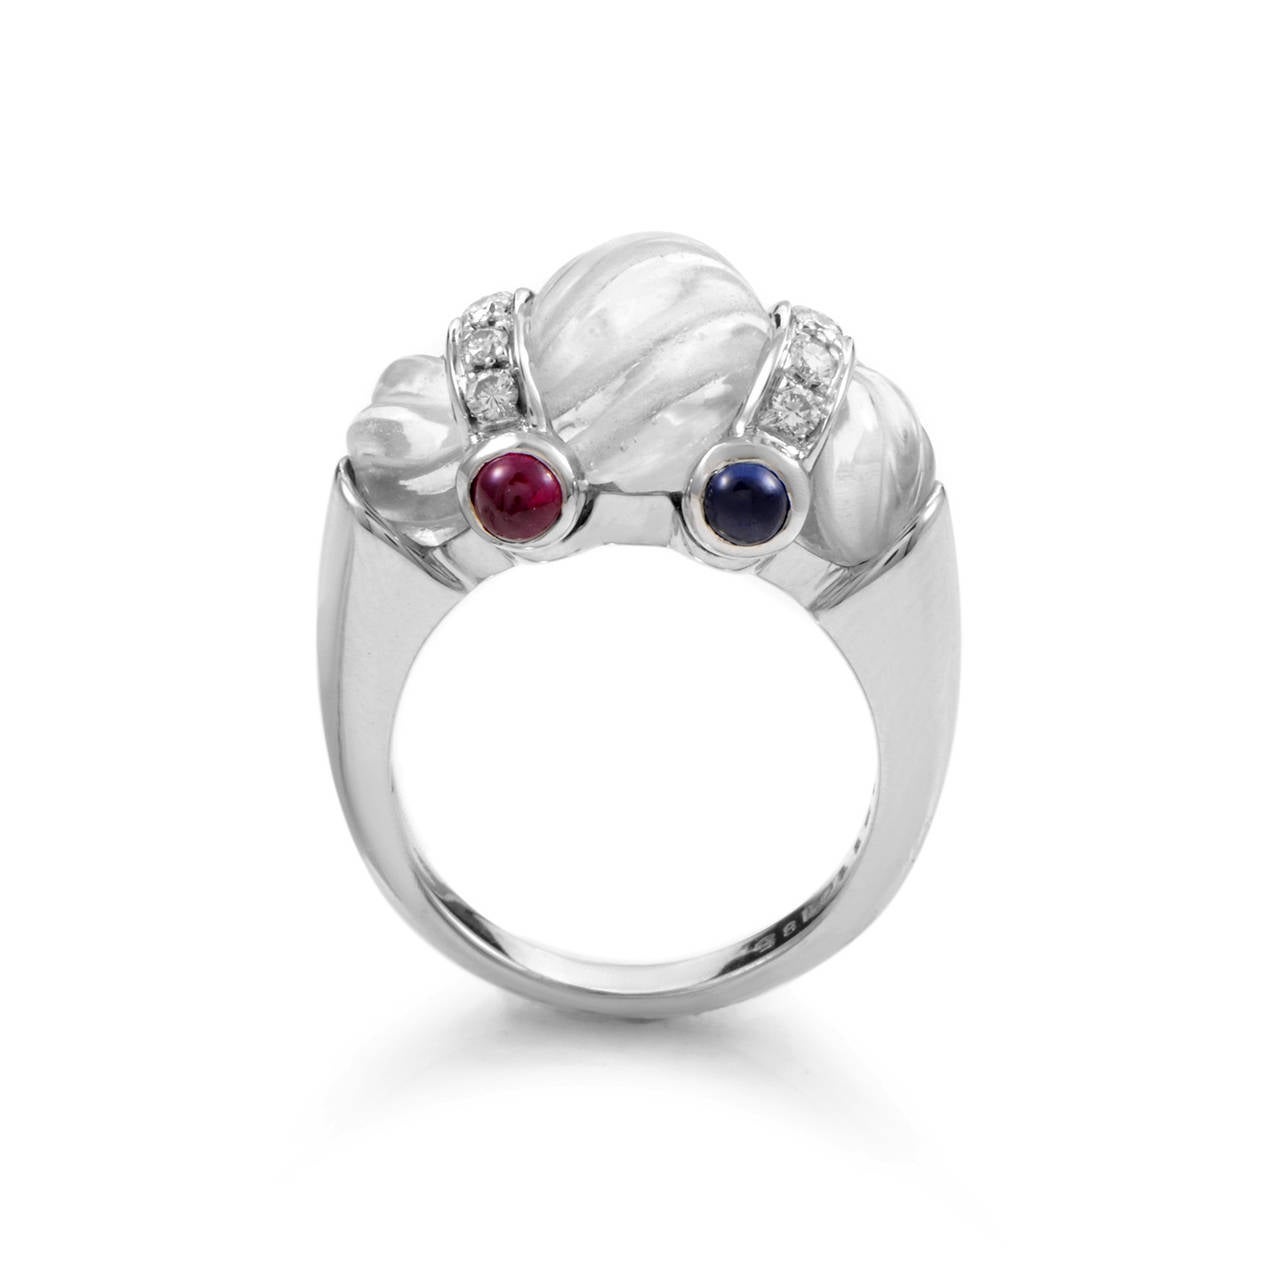 Light and ethereal are the perfect words to describe this gem-laden ring from Boucheron. The ring is smade of 18K white gold and is accented with three gorgeously carved white crystals. Lastly, emerald, ruby, and sapphire cabochons paired with white